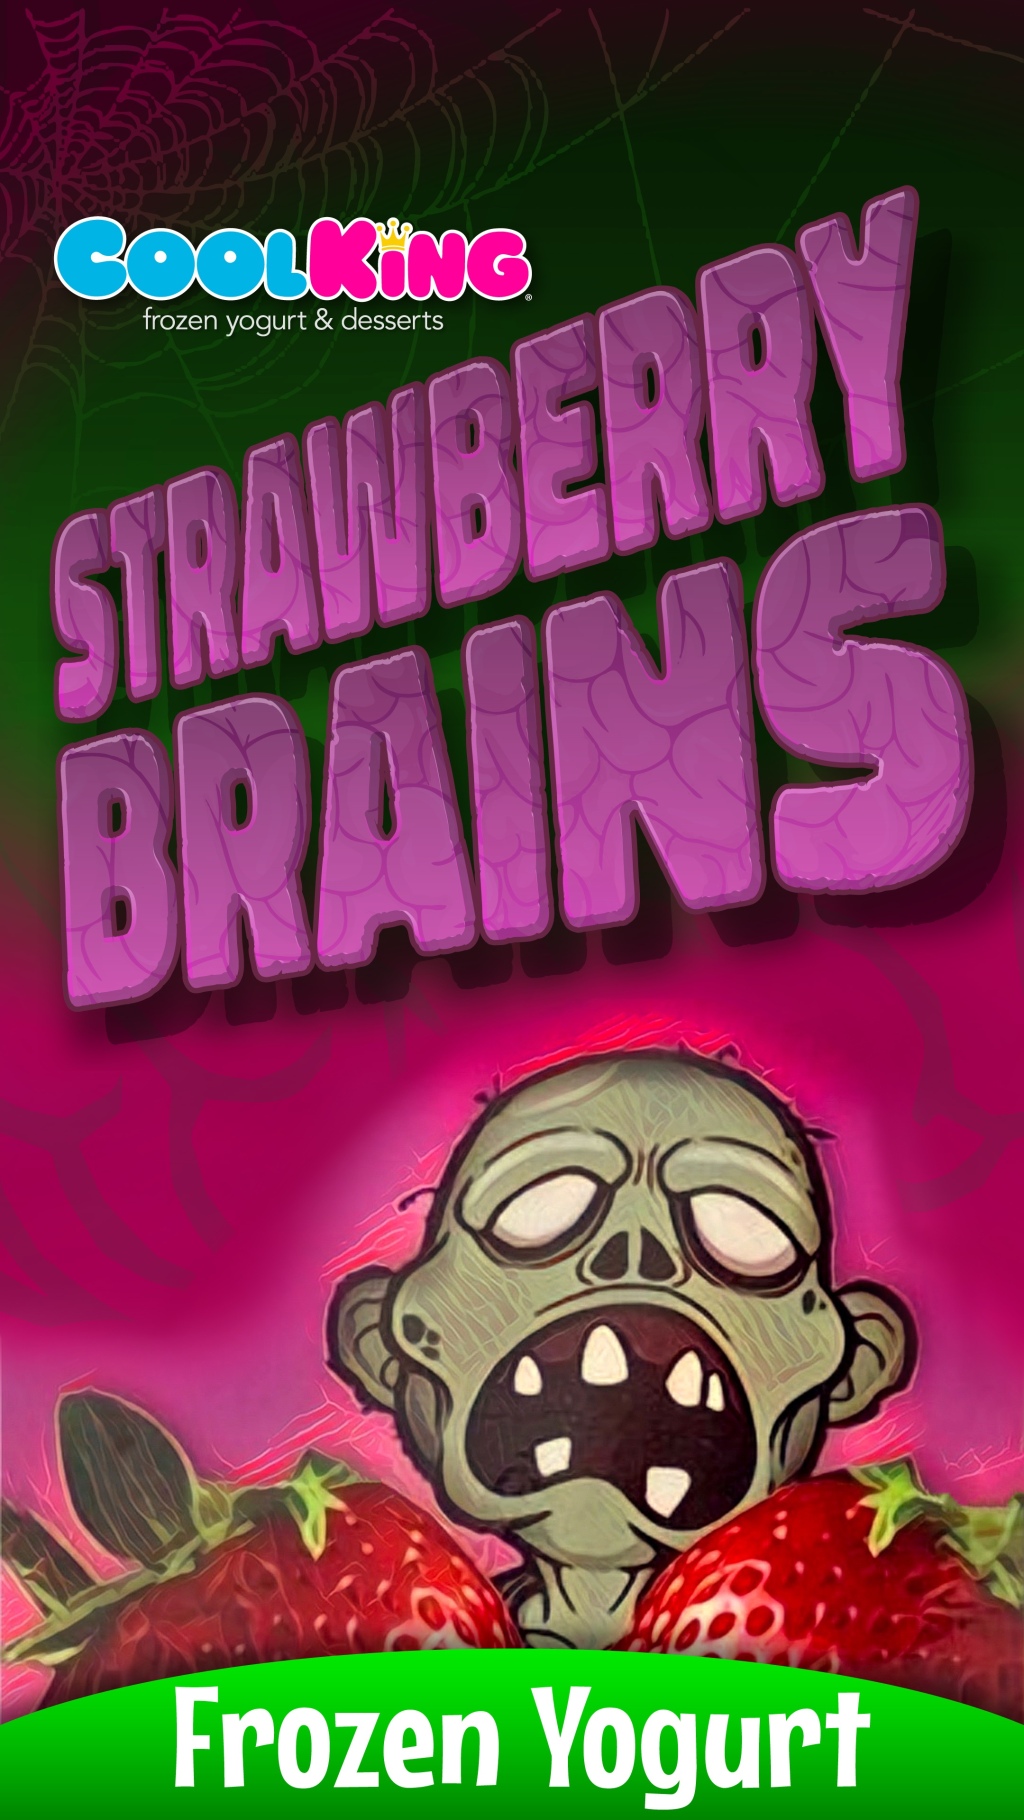 Cool King® “Strawberry Brains” Advertisement & Story